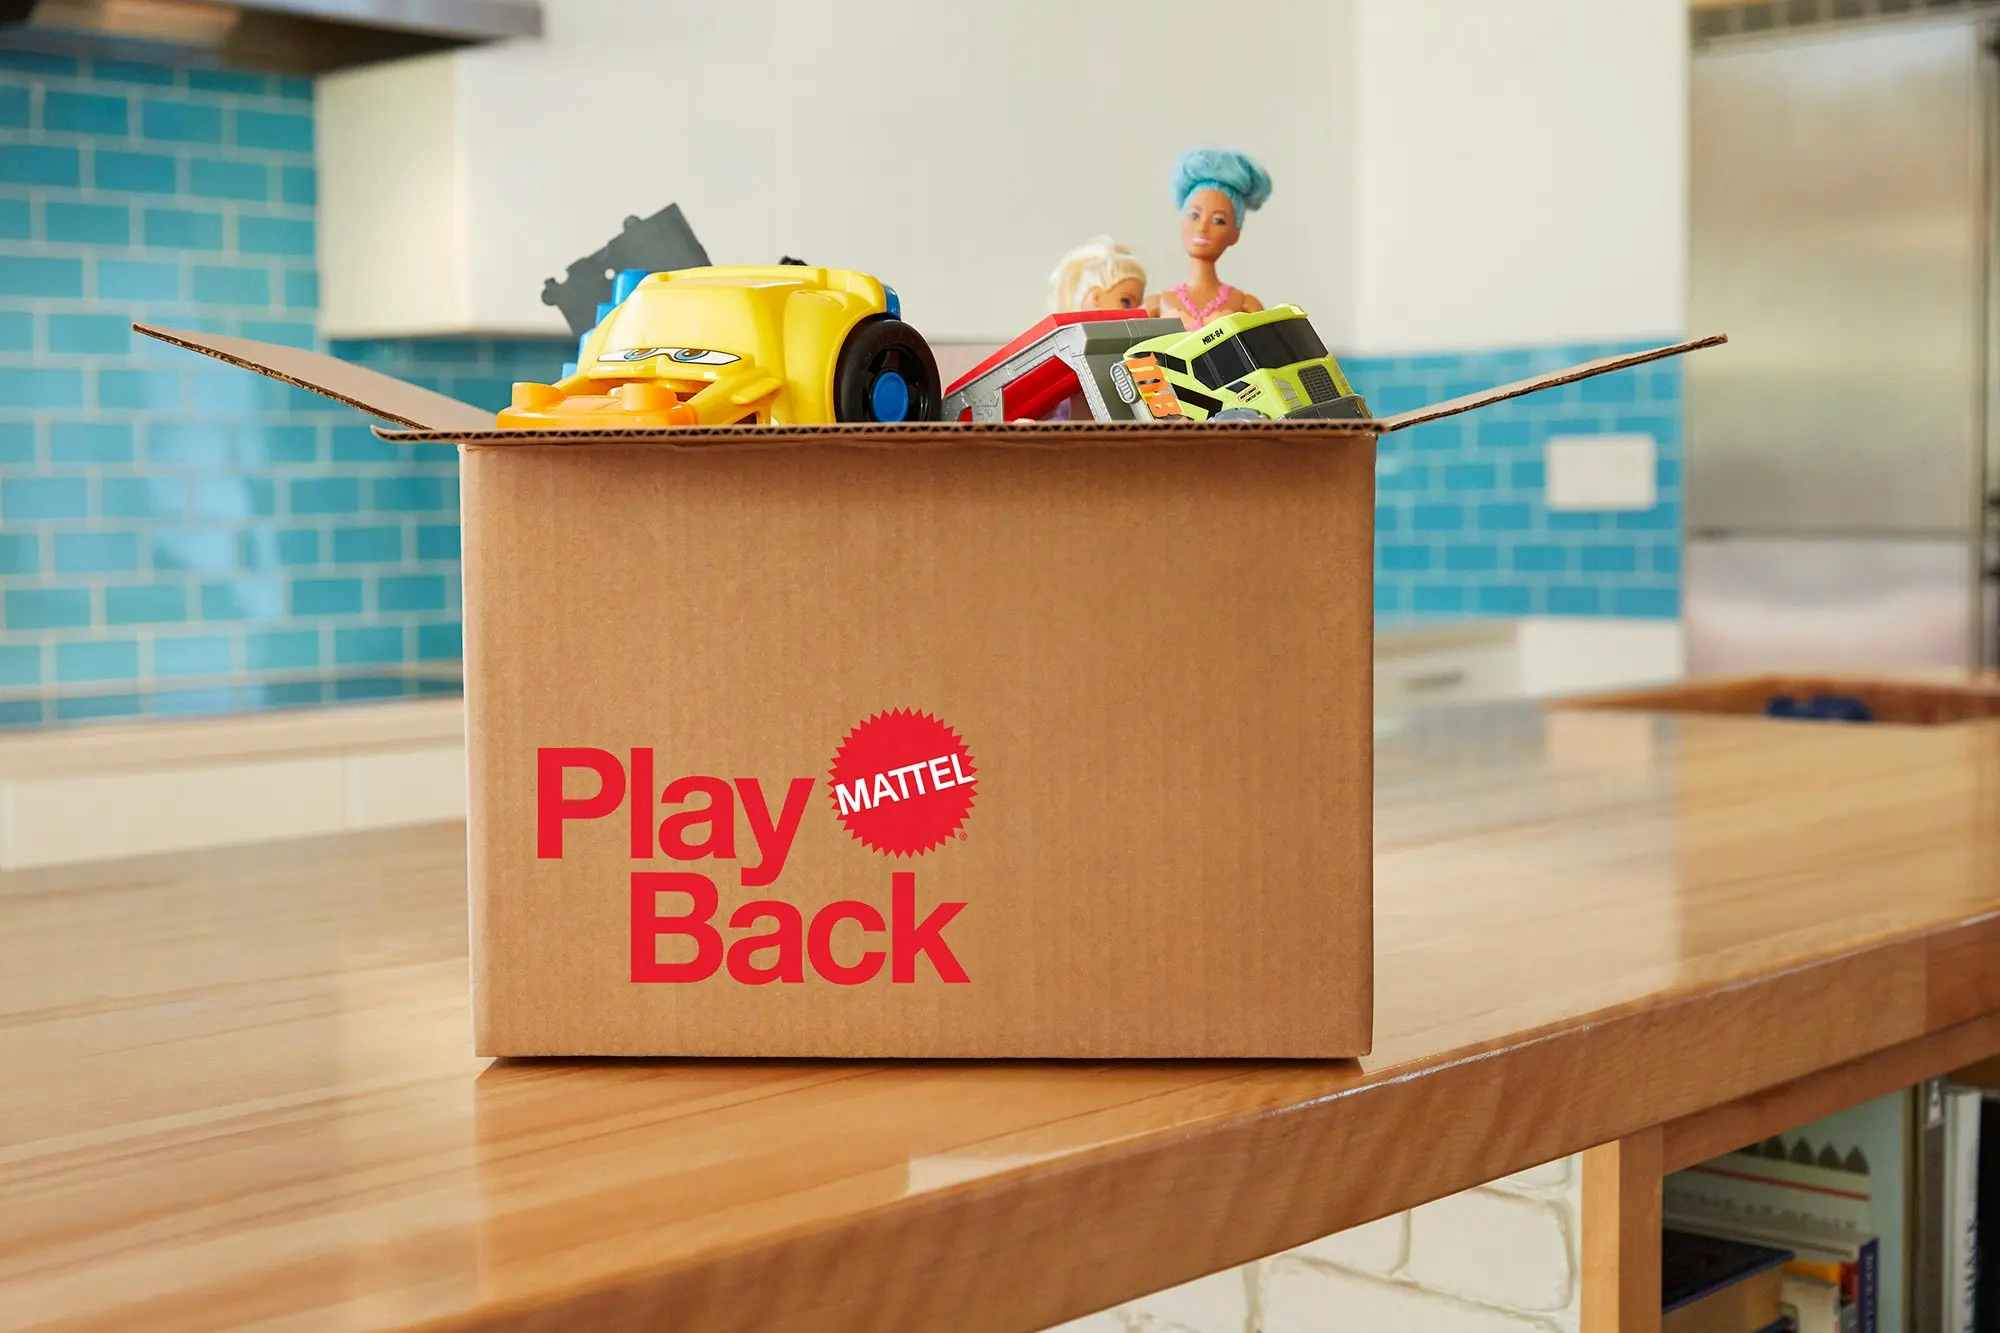 A box of old toys collected for the Mattel PlayBack program sitting on a counter